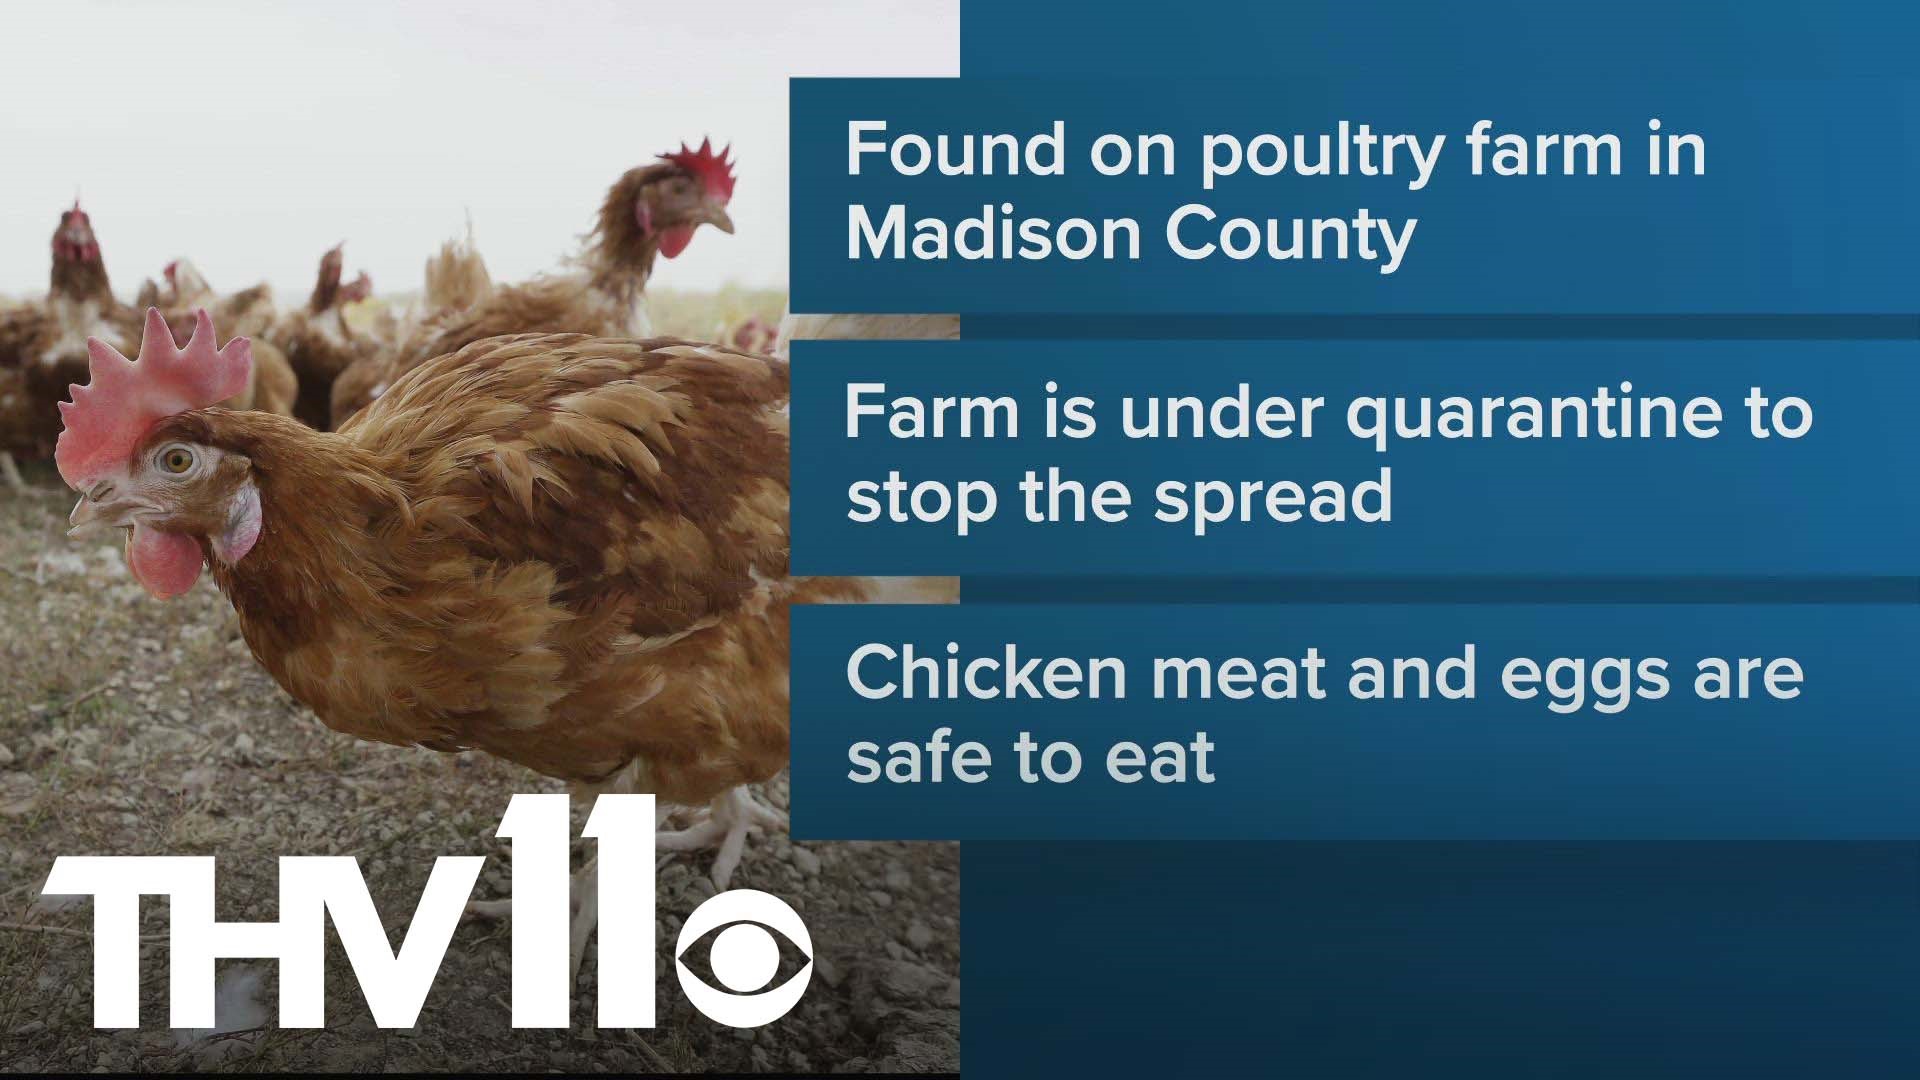 Arkansas poultry farmers have been urged to take precautions after avian influenza, or bird flu, was confirmed on a Madison County farm.